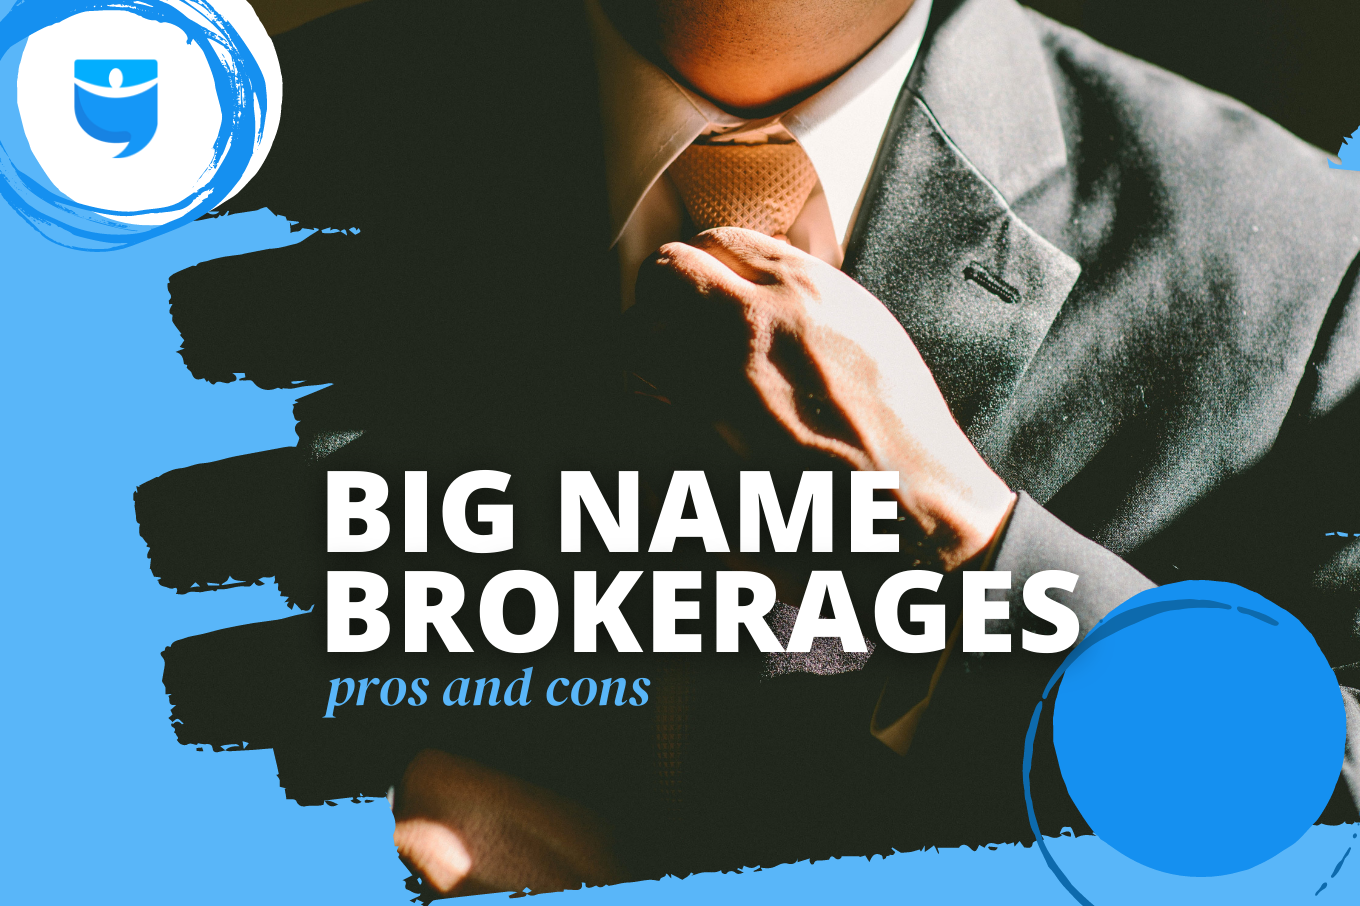 7 Pros and Cons of Big Name Brokerages for Real Estate Investor-Agents